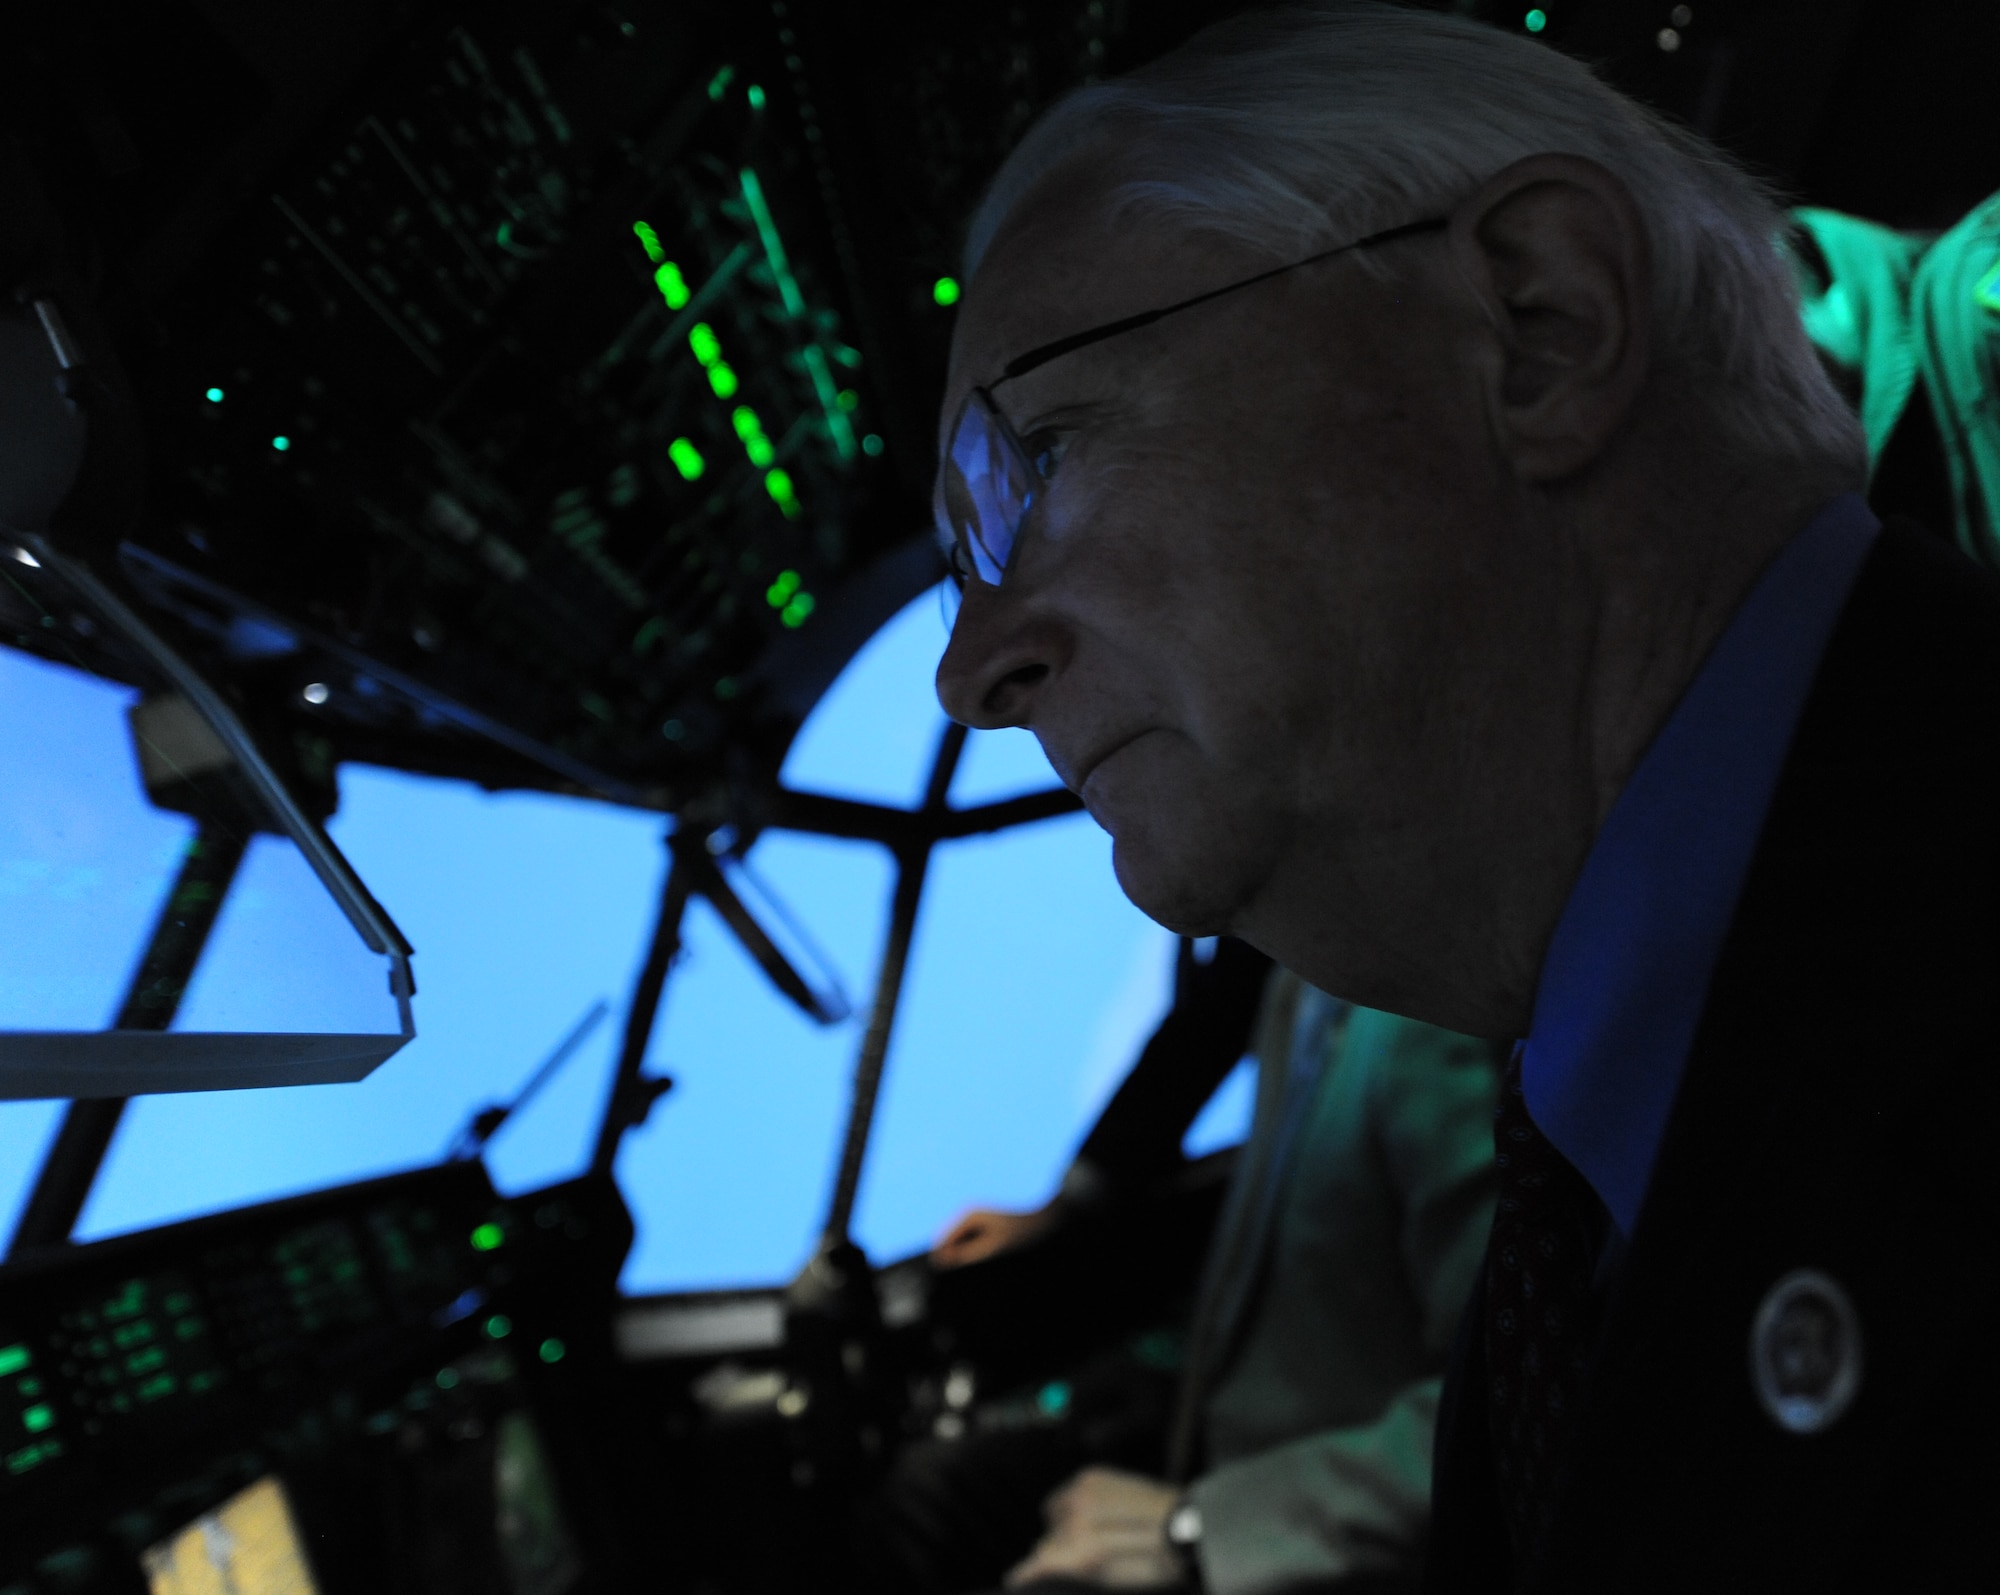 U.S. Rep. Randy Neugebauer views Dyess’ new C-130J Super Hercules simulator April 22, 2014, at Dyess Air Force Base, Texas. The $26 million simulator will allow aircrew to complete up to 88 percent of their annual training requirements in a simulated environment, which can be tailored to maximize the benefits for individual crews. (U.S. Air Force photo by Airman 1st Class Kedesha Pennant/Released)